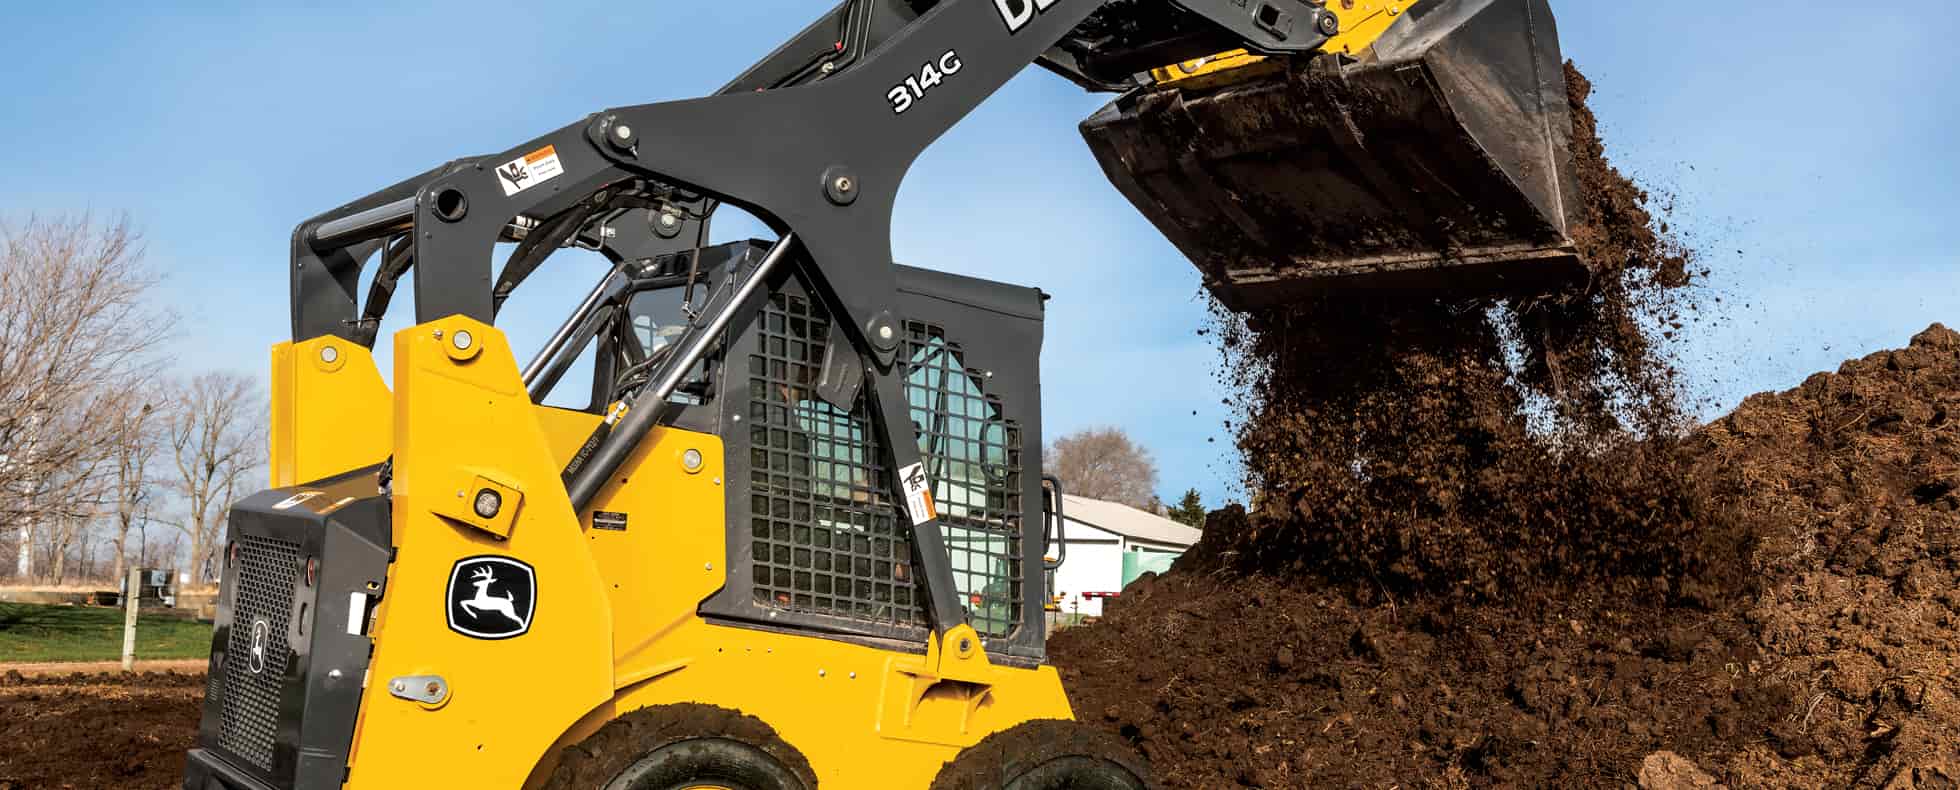 4-in-1 Buckets – How to Choose the Right Compact Construction Equipment Attachments